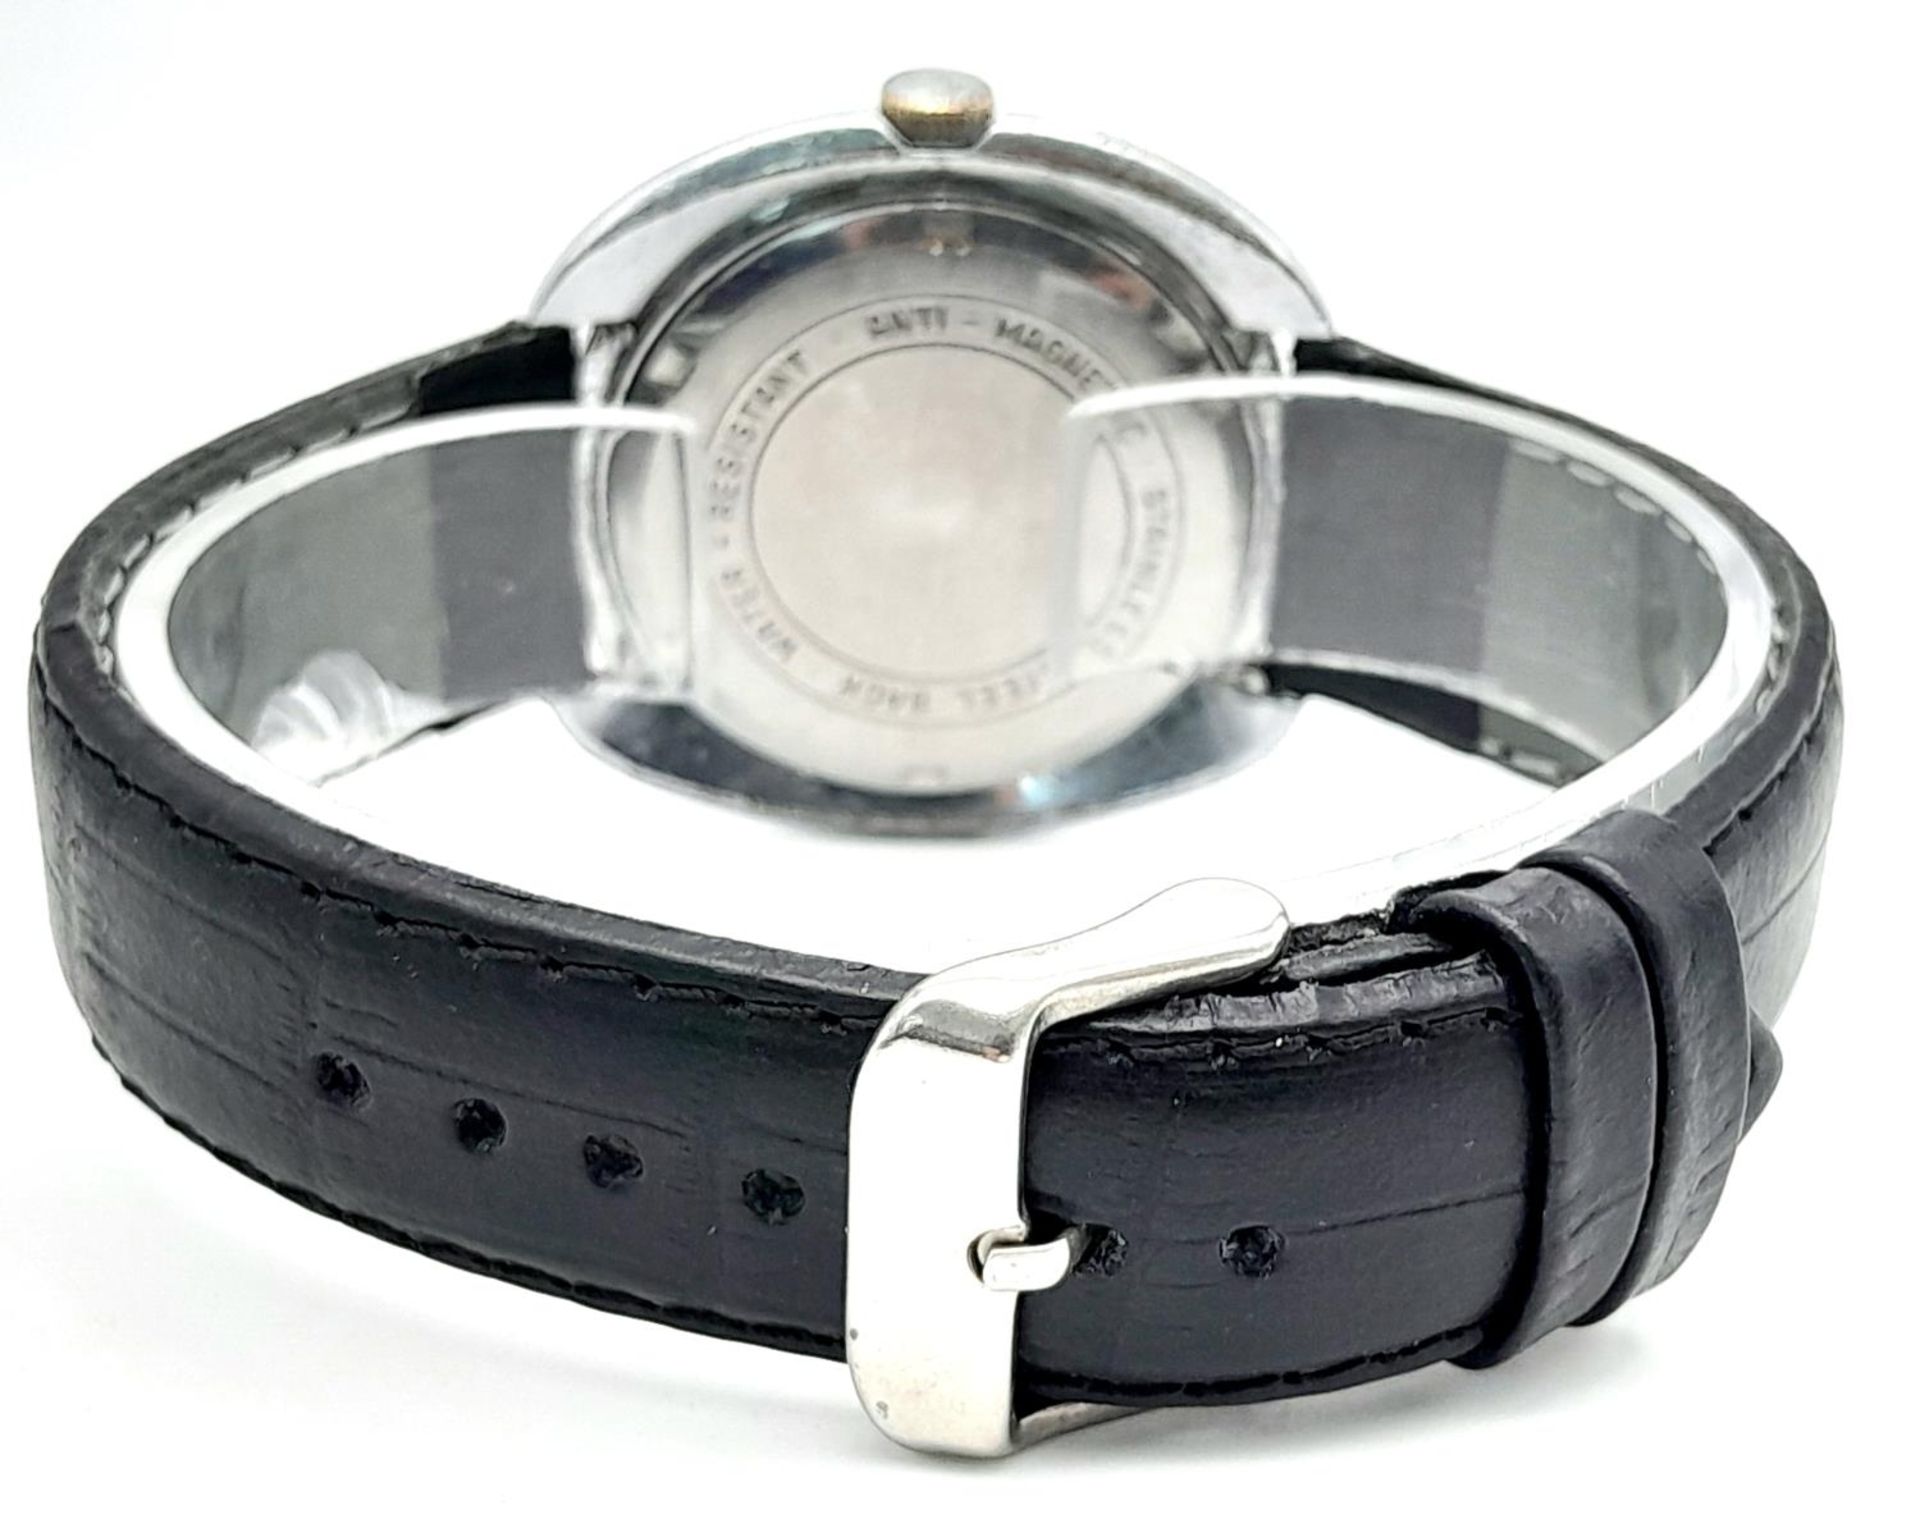 A Vintage Smiths Mechanical Gents Watch. Black leather strap. Stainless steel case - 42mm. Blue dial - Image 4 of 6